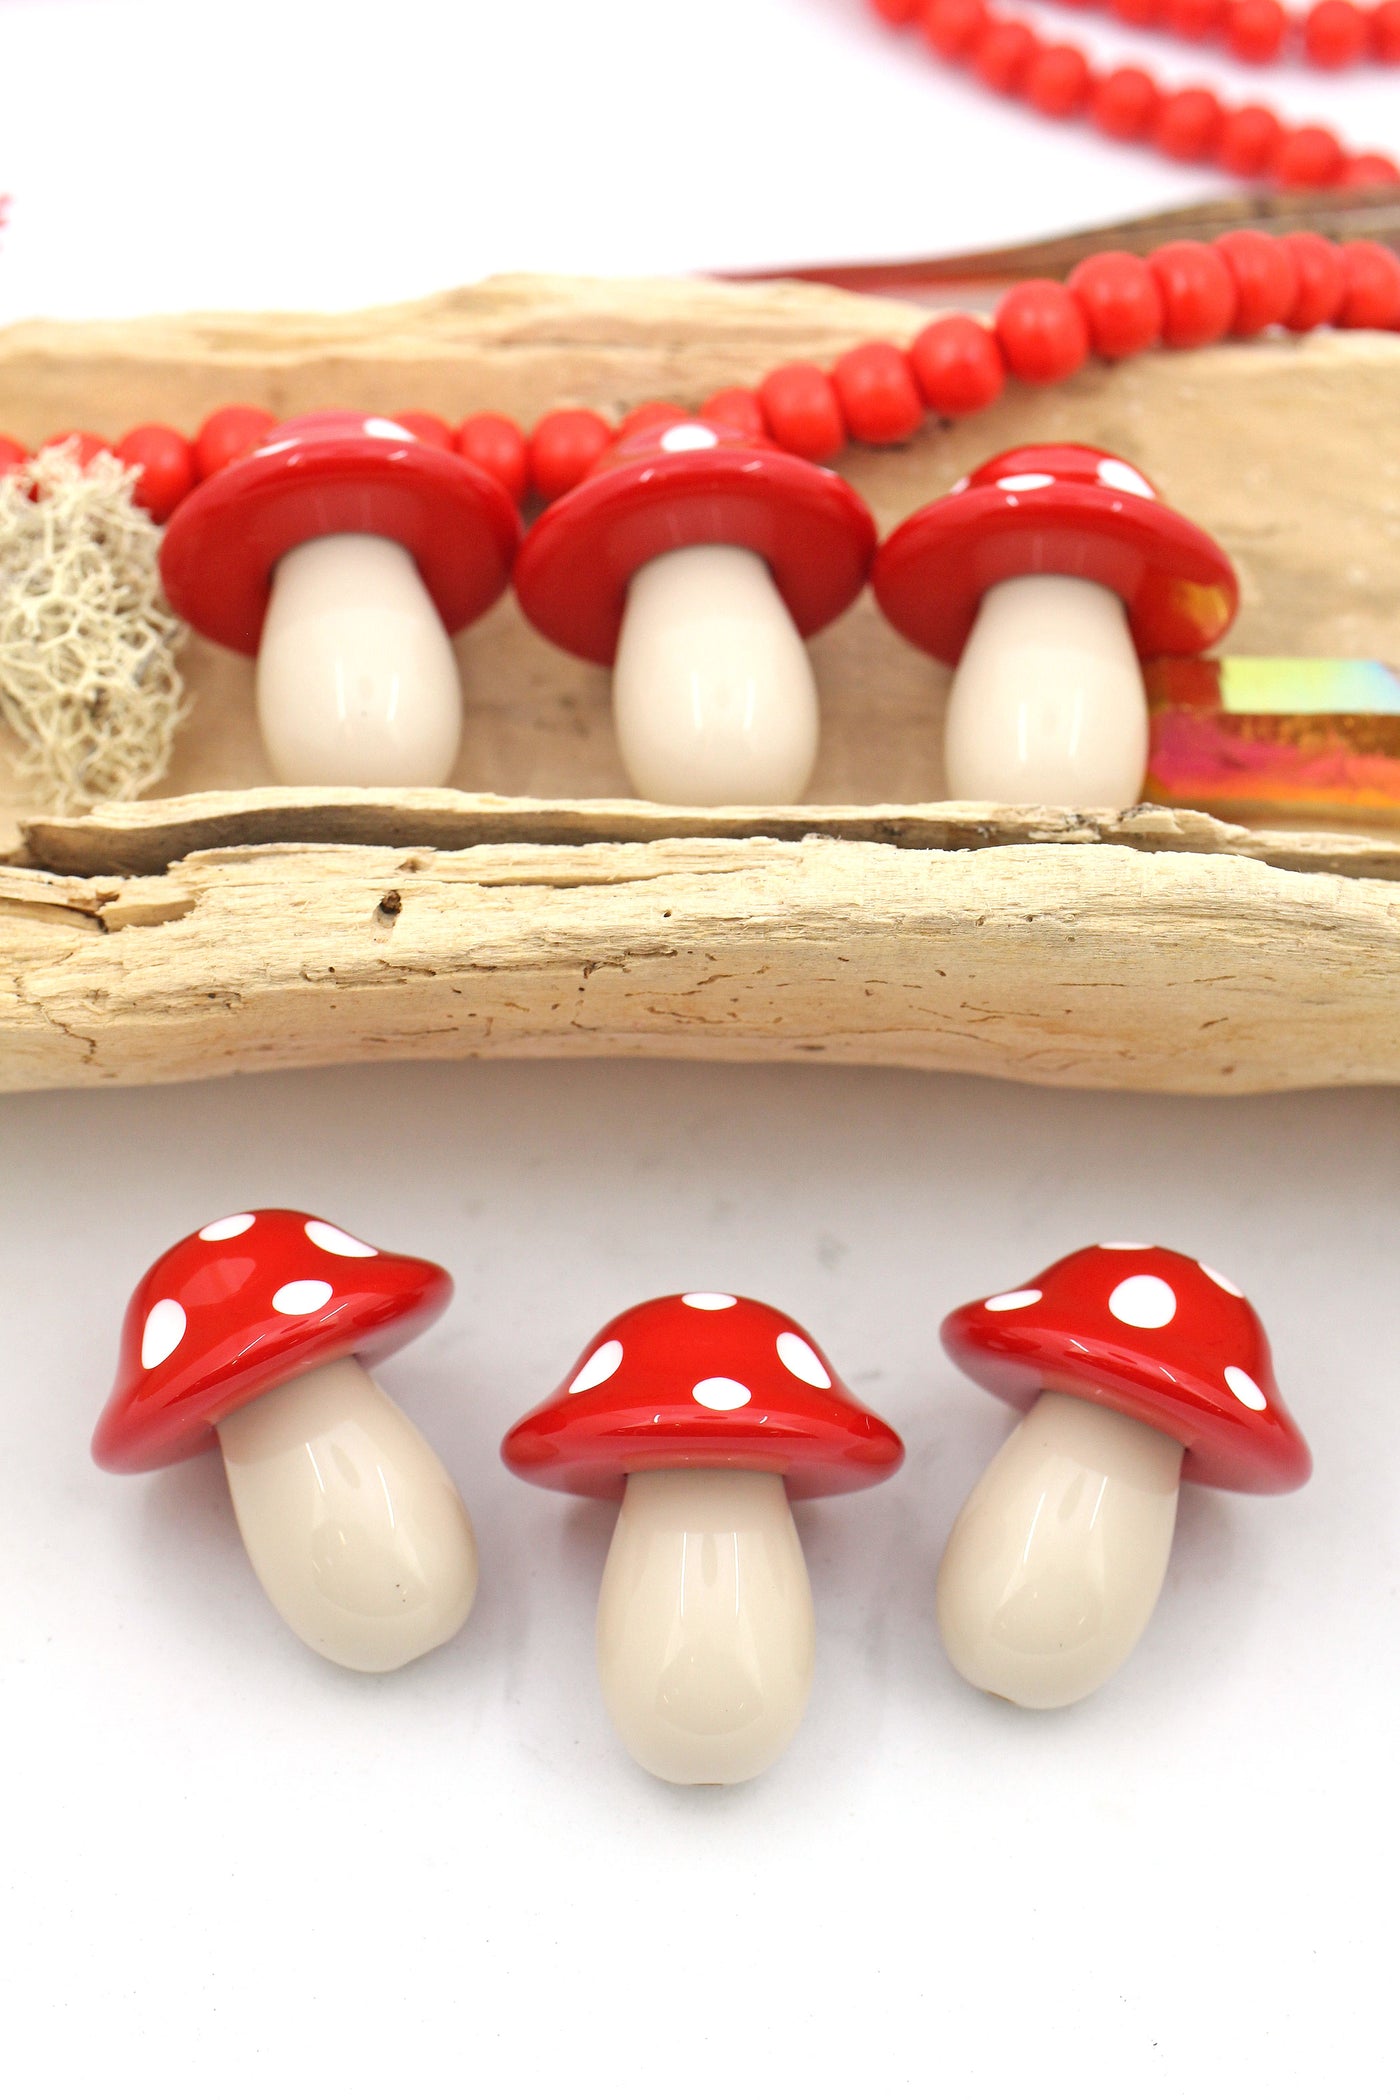 Red & White Magic Mushroom Charm, Hand Carved Resin Bead from Italy, Ava Motherwell Collection